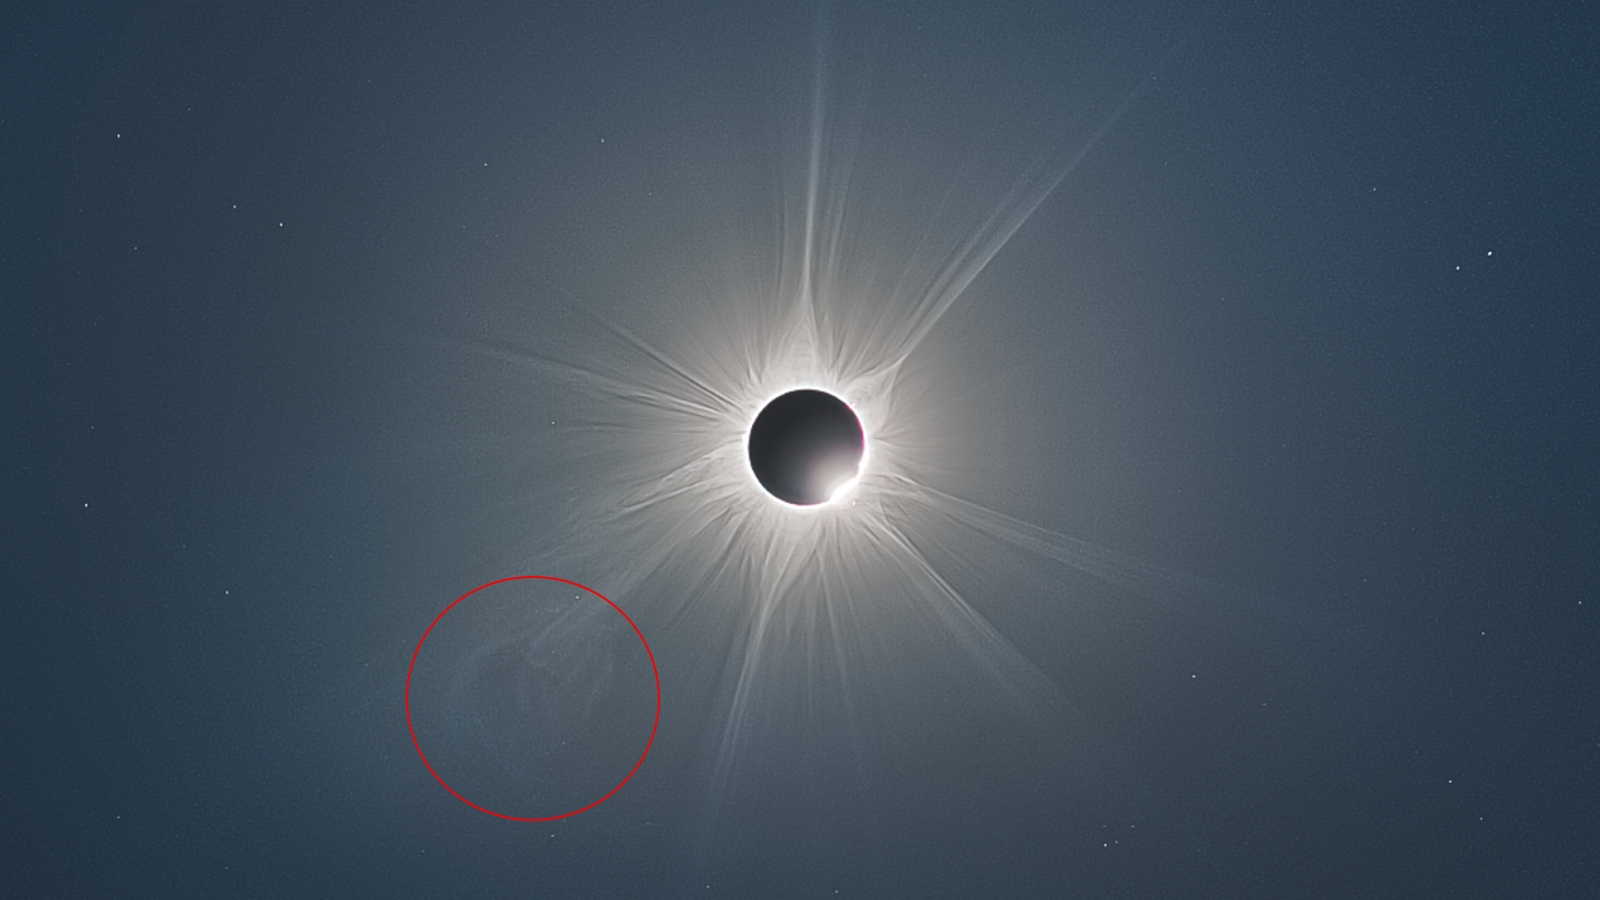 The corona shines around the sun during an eclipse